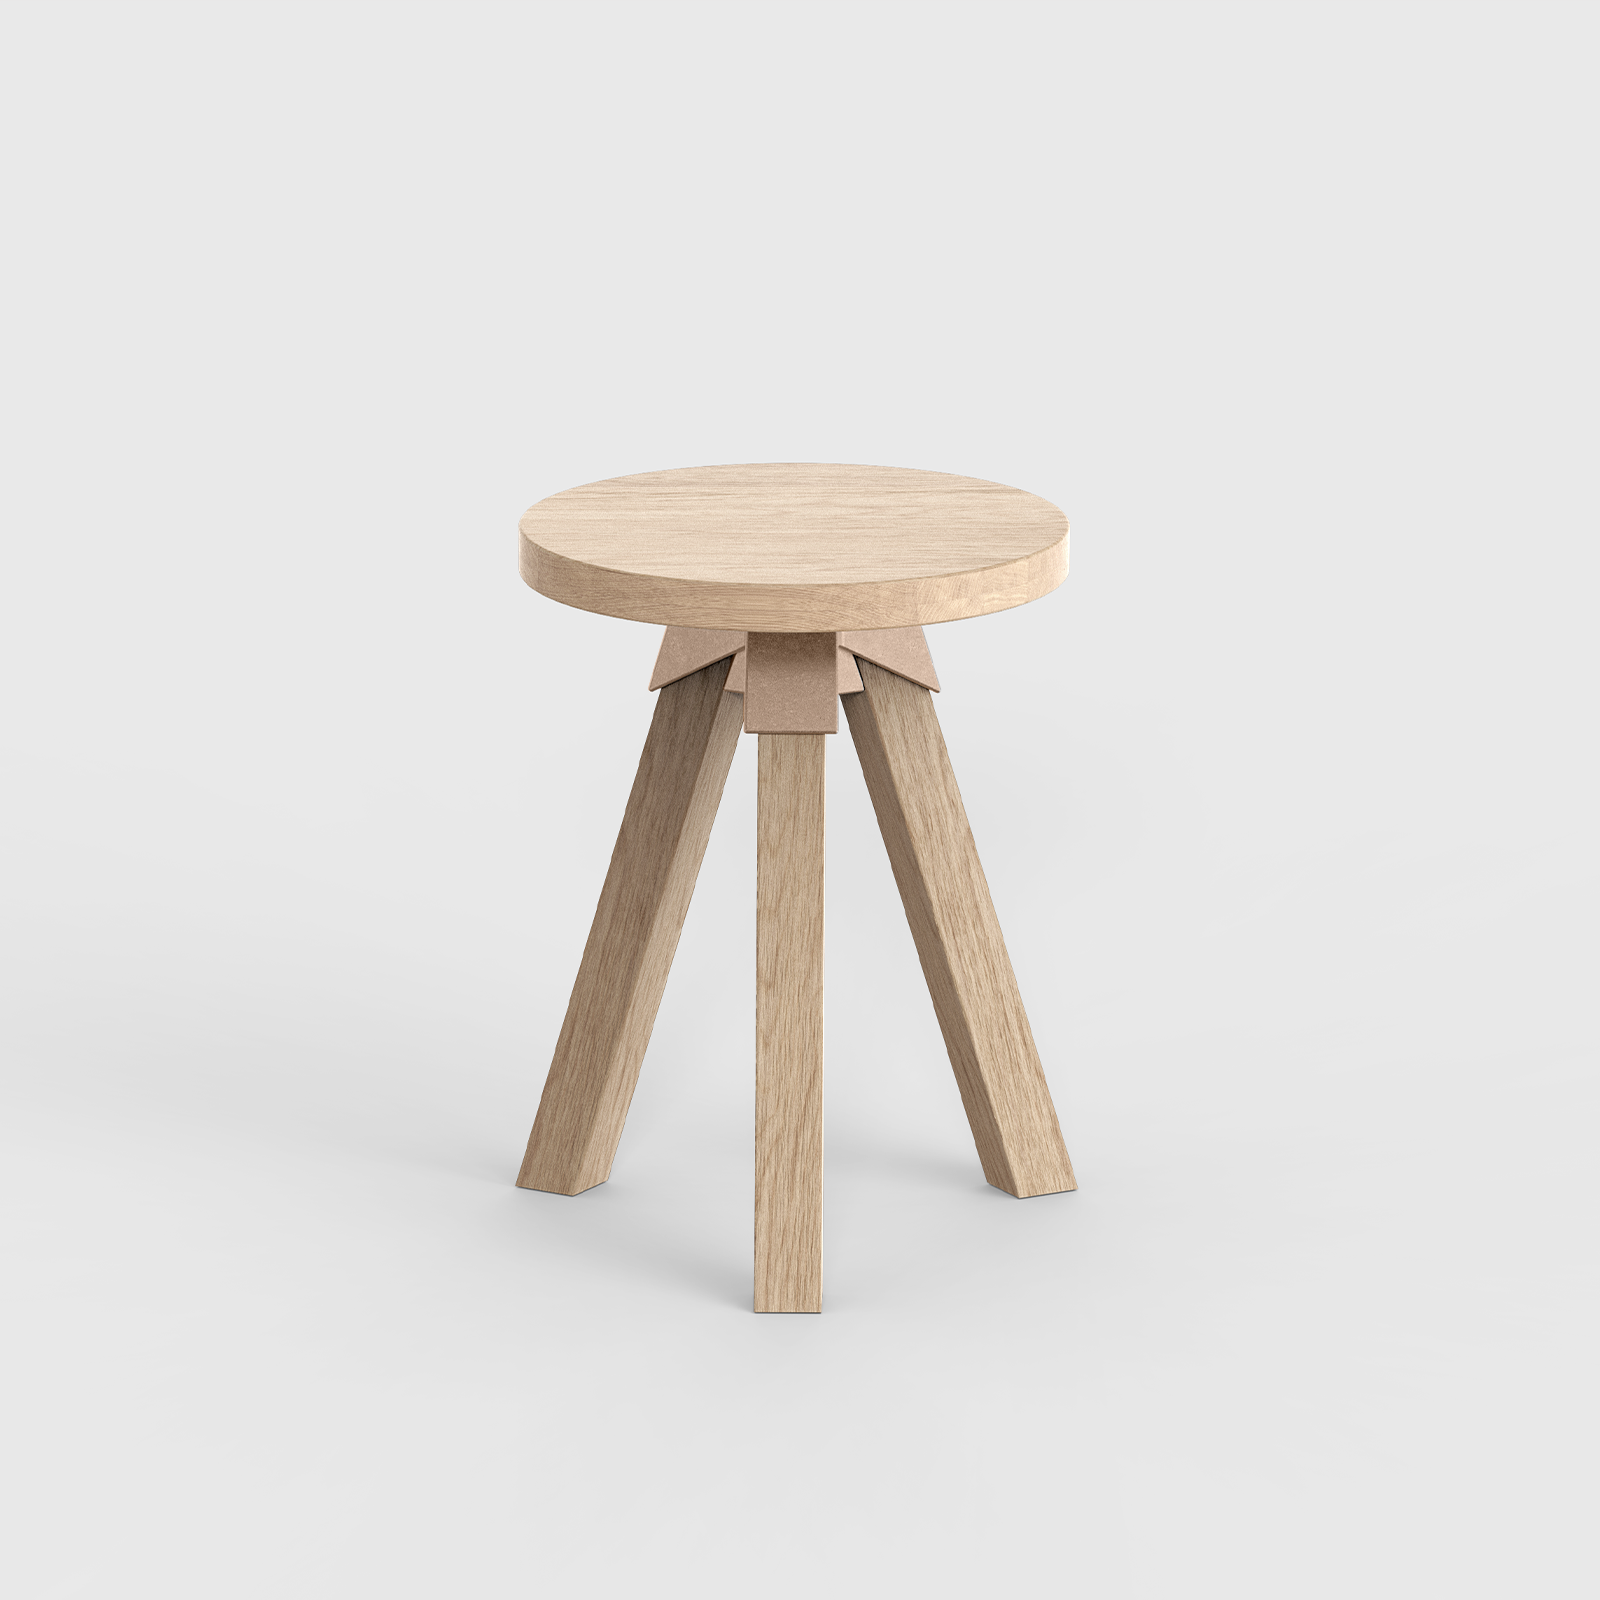 A-joint stool in solid American Oak with cast bronze A-joint